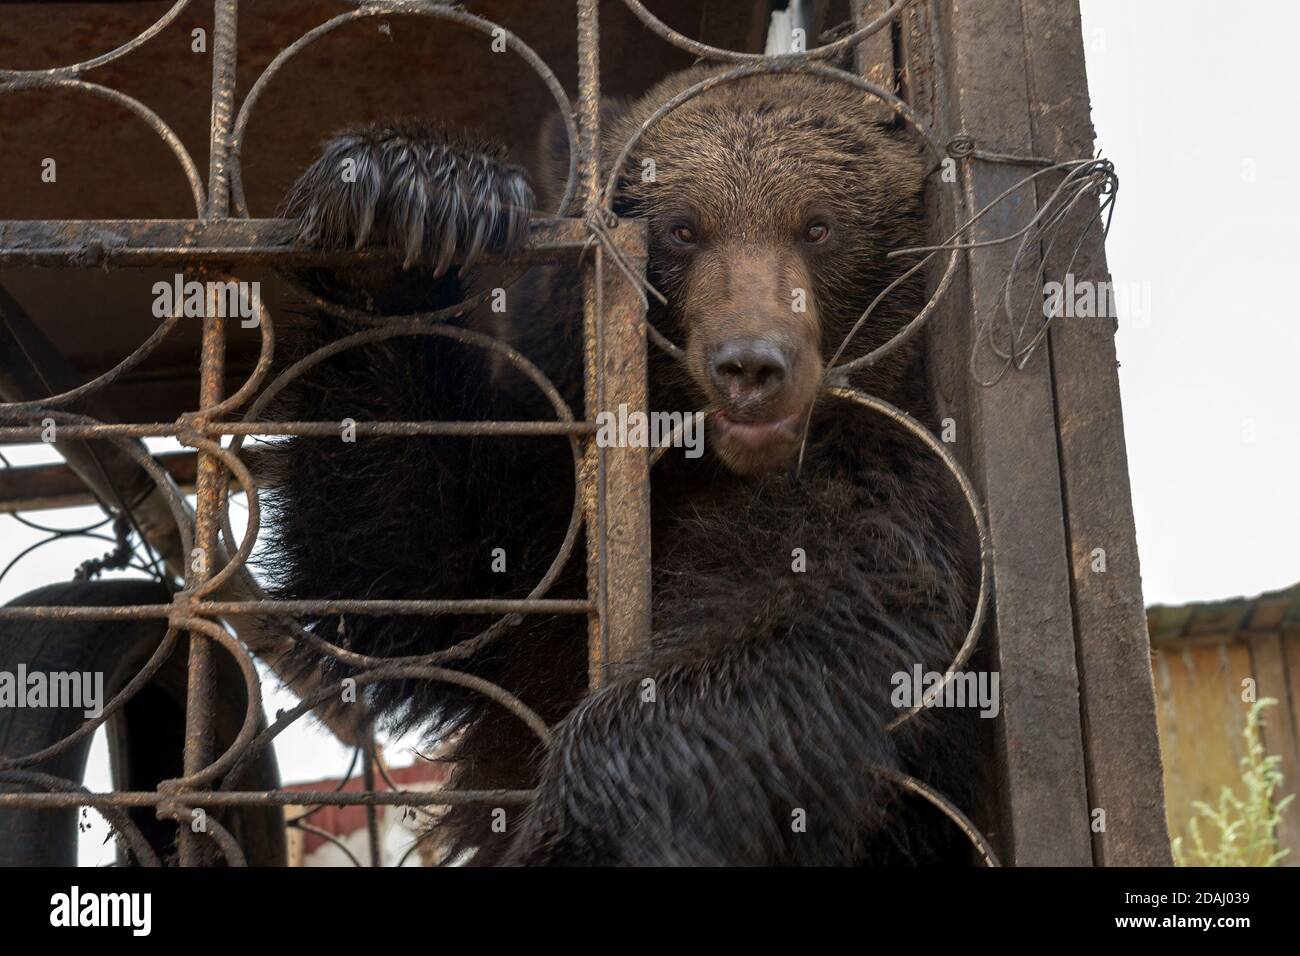 Brown bear (Ursus arctos) climbs on the metal bars of the cage. Stock Photo